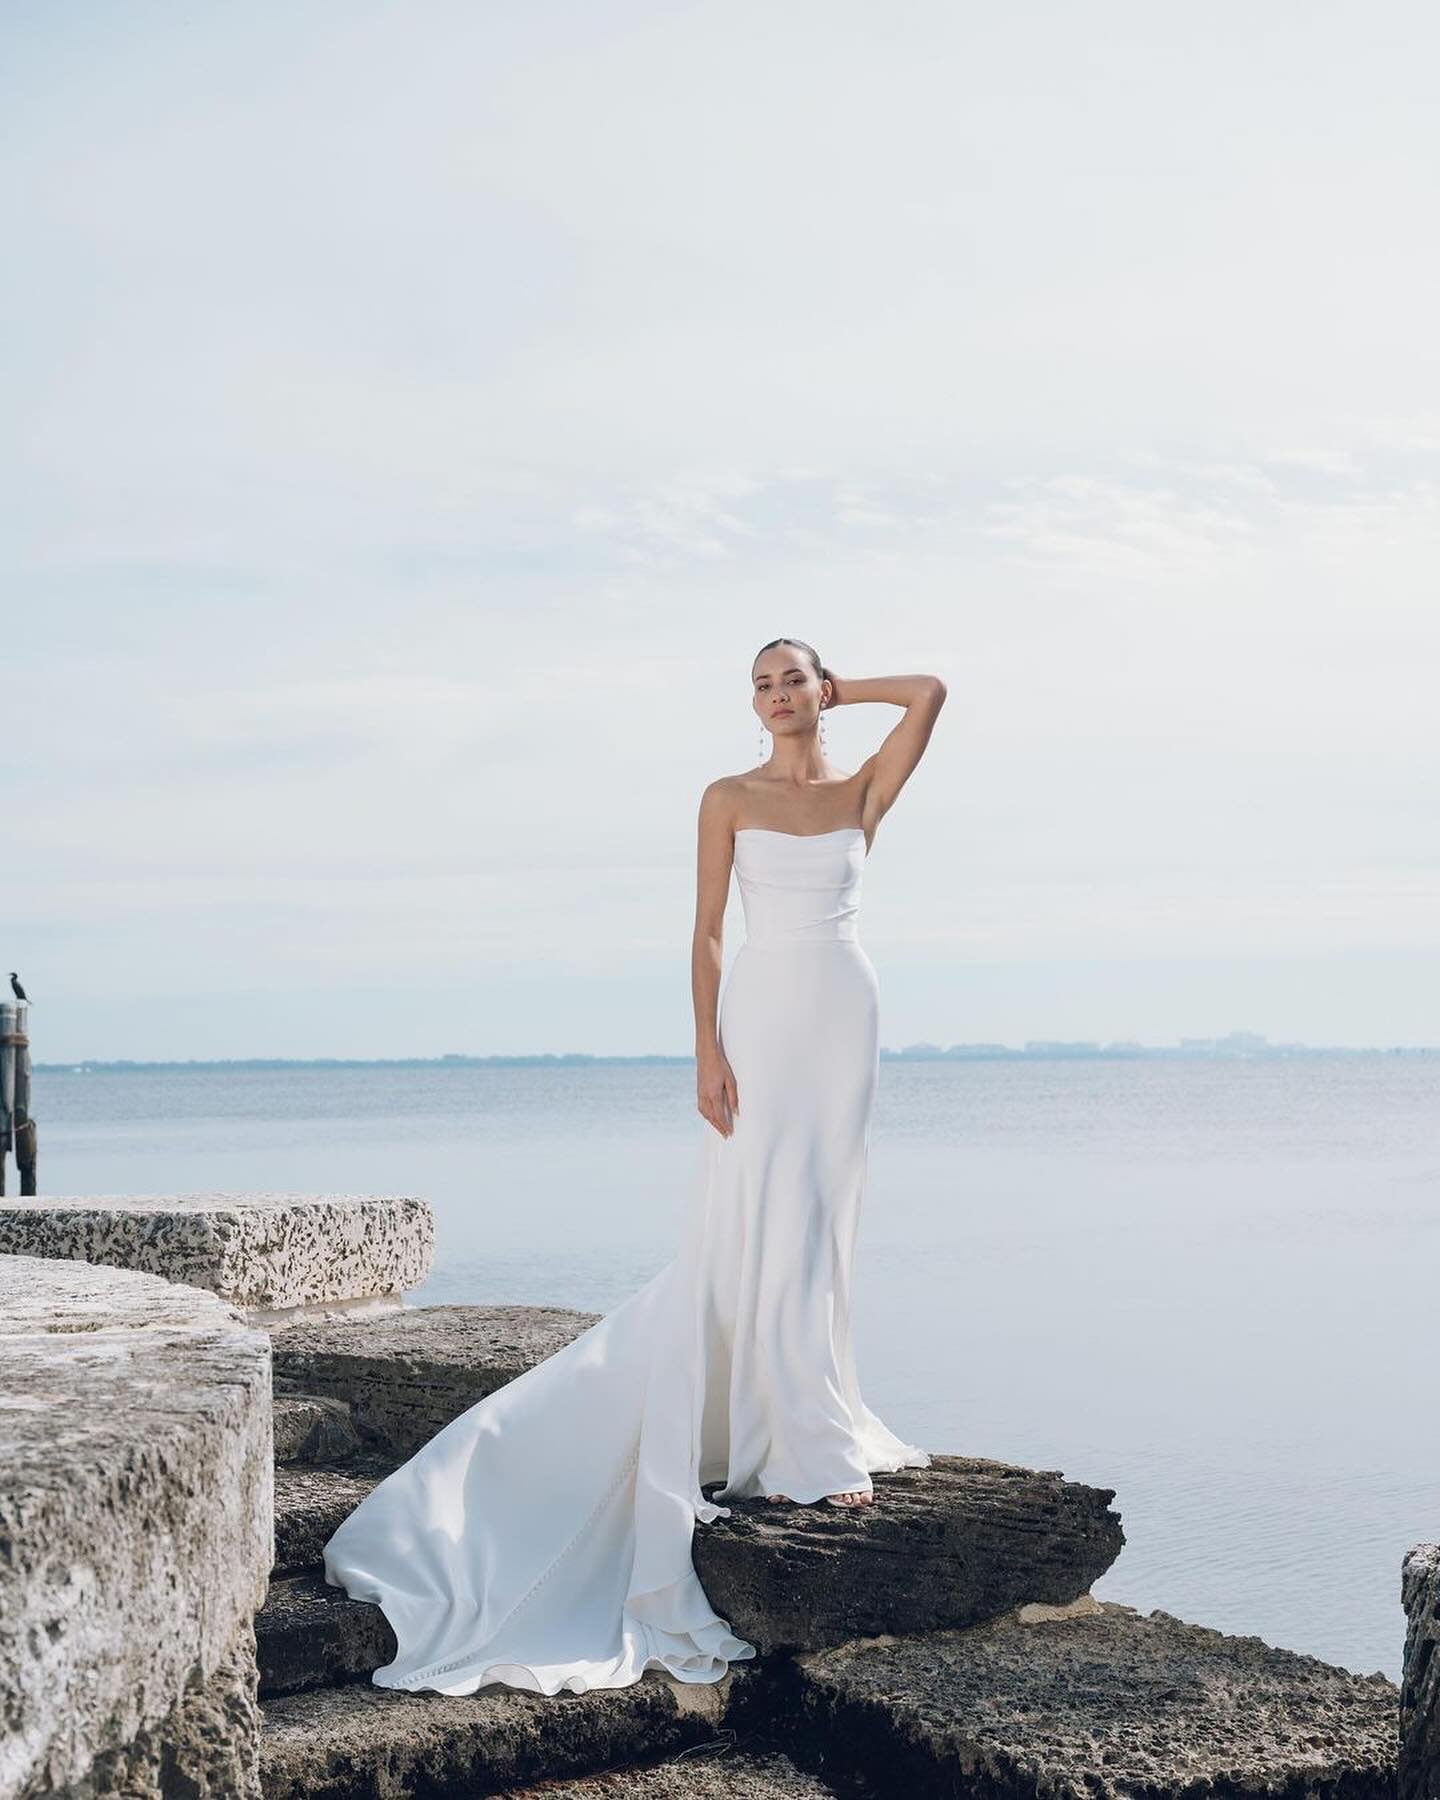 Introducing: The Reverie Jenny Yoo Collection 🤍 A collection adorned with delicate floral details + minimalist silhouettes. Designed for the bride looking for a dress to evoke emotion. 

Try on the new Jenny Yoo collection at @ellejamesbridal today!